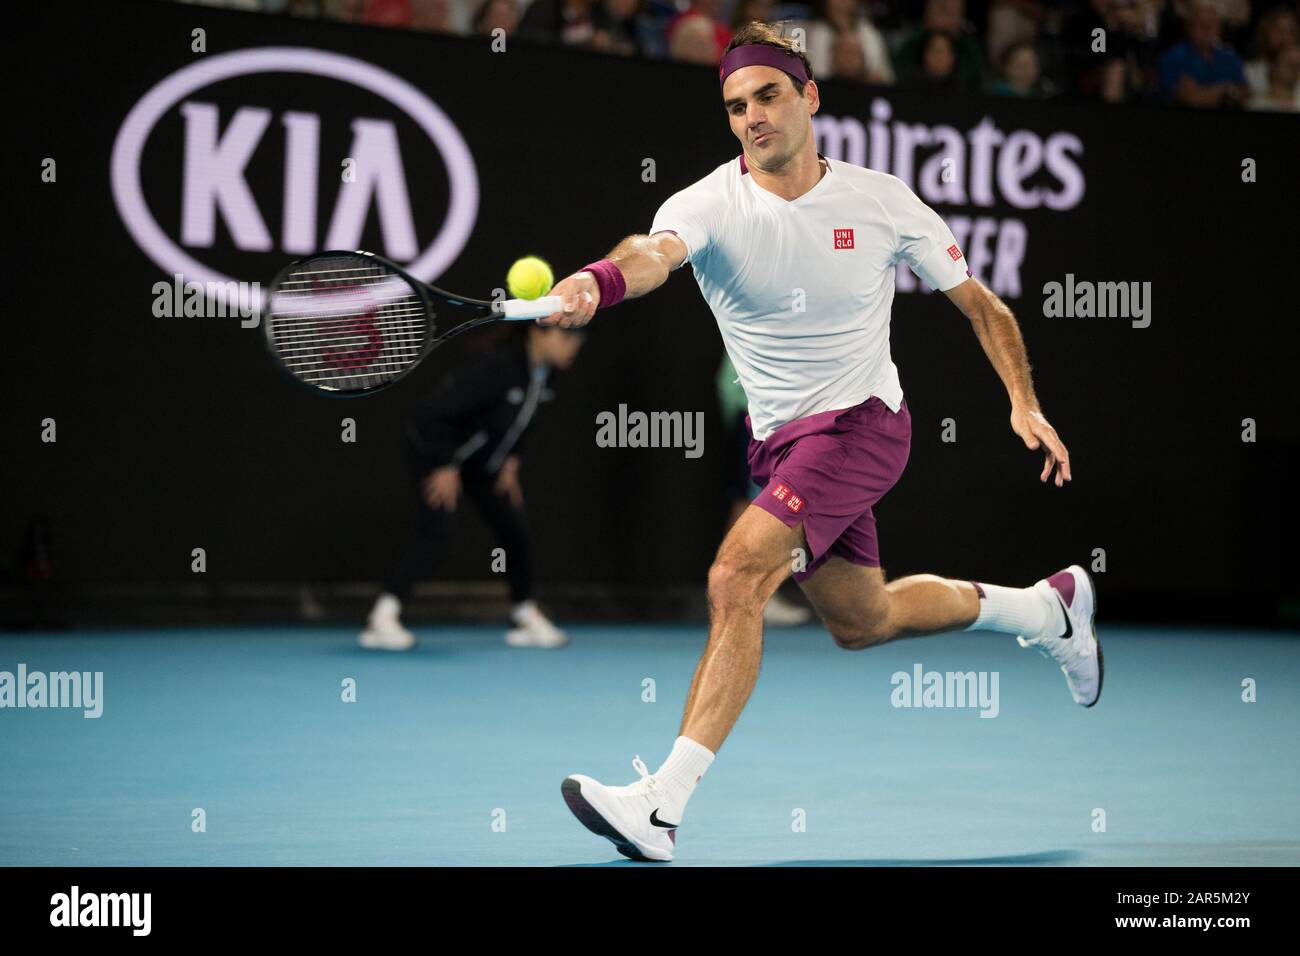 Melbourne, Australia. 26th Jan, 2020. Roger Federer of Switzerland plays a  forehand against Marton Fucsovics of Hungary during the fourth round match  at the ATP Australian Open 2020 at Melbourne Park, Melbourne,